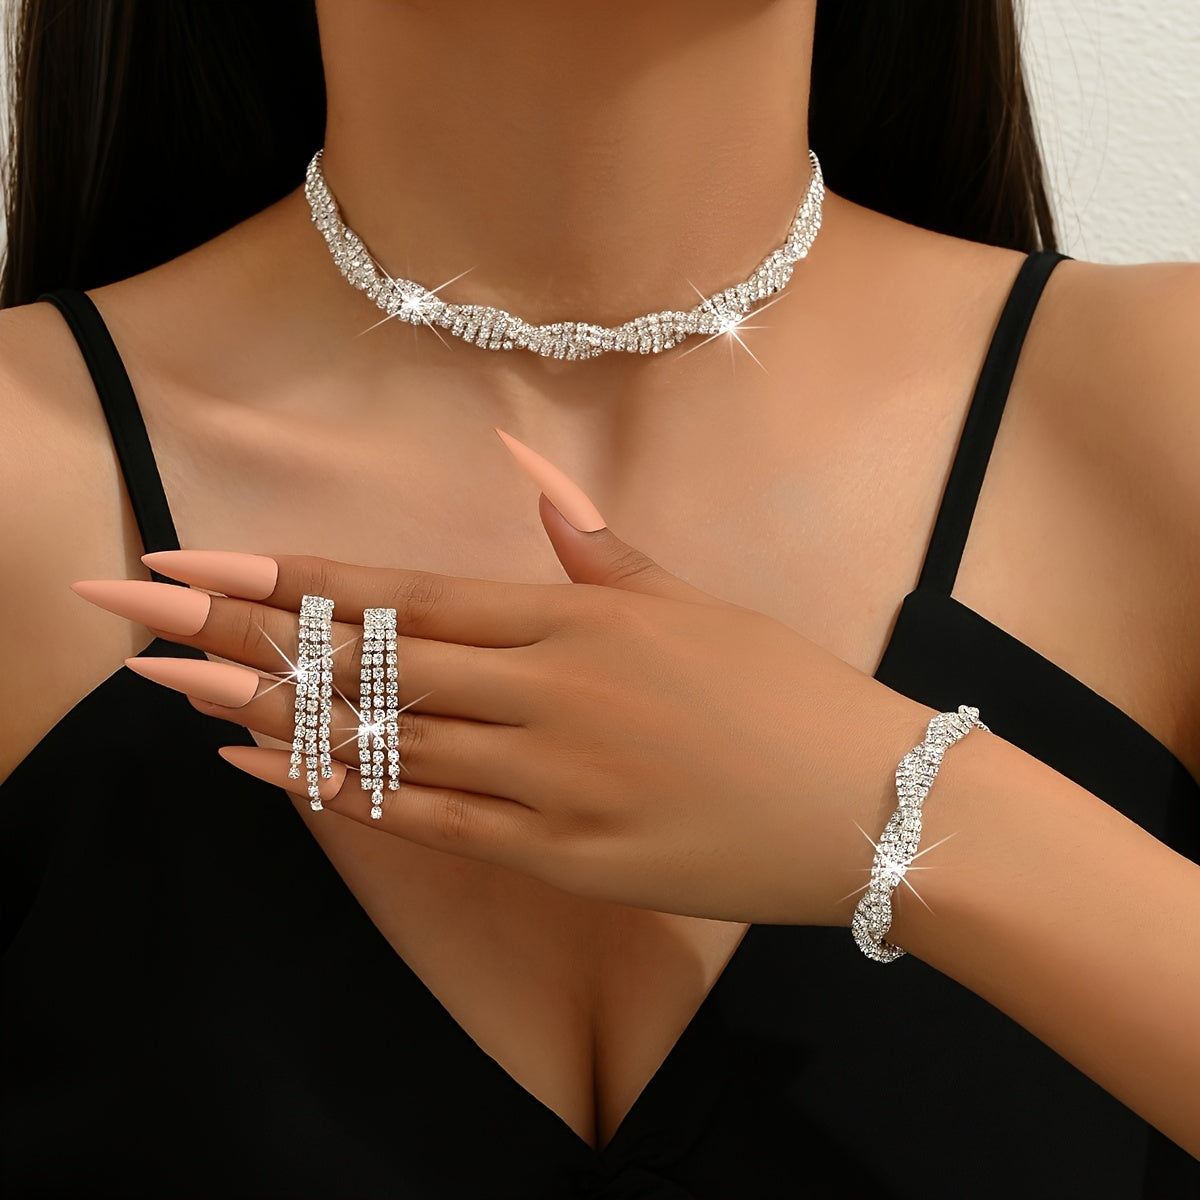 4pcs Necklace Earrings Plus Bracelet Boho Style Jewelry Set Silver Plated Inlaid Rhinestone Trendy Intertwined Design Dainty Party Accessories